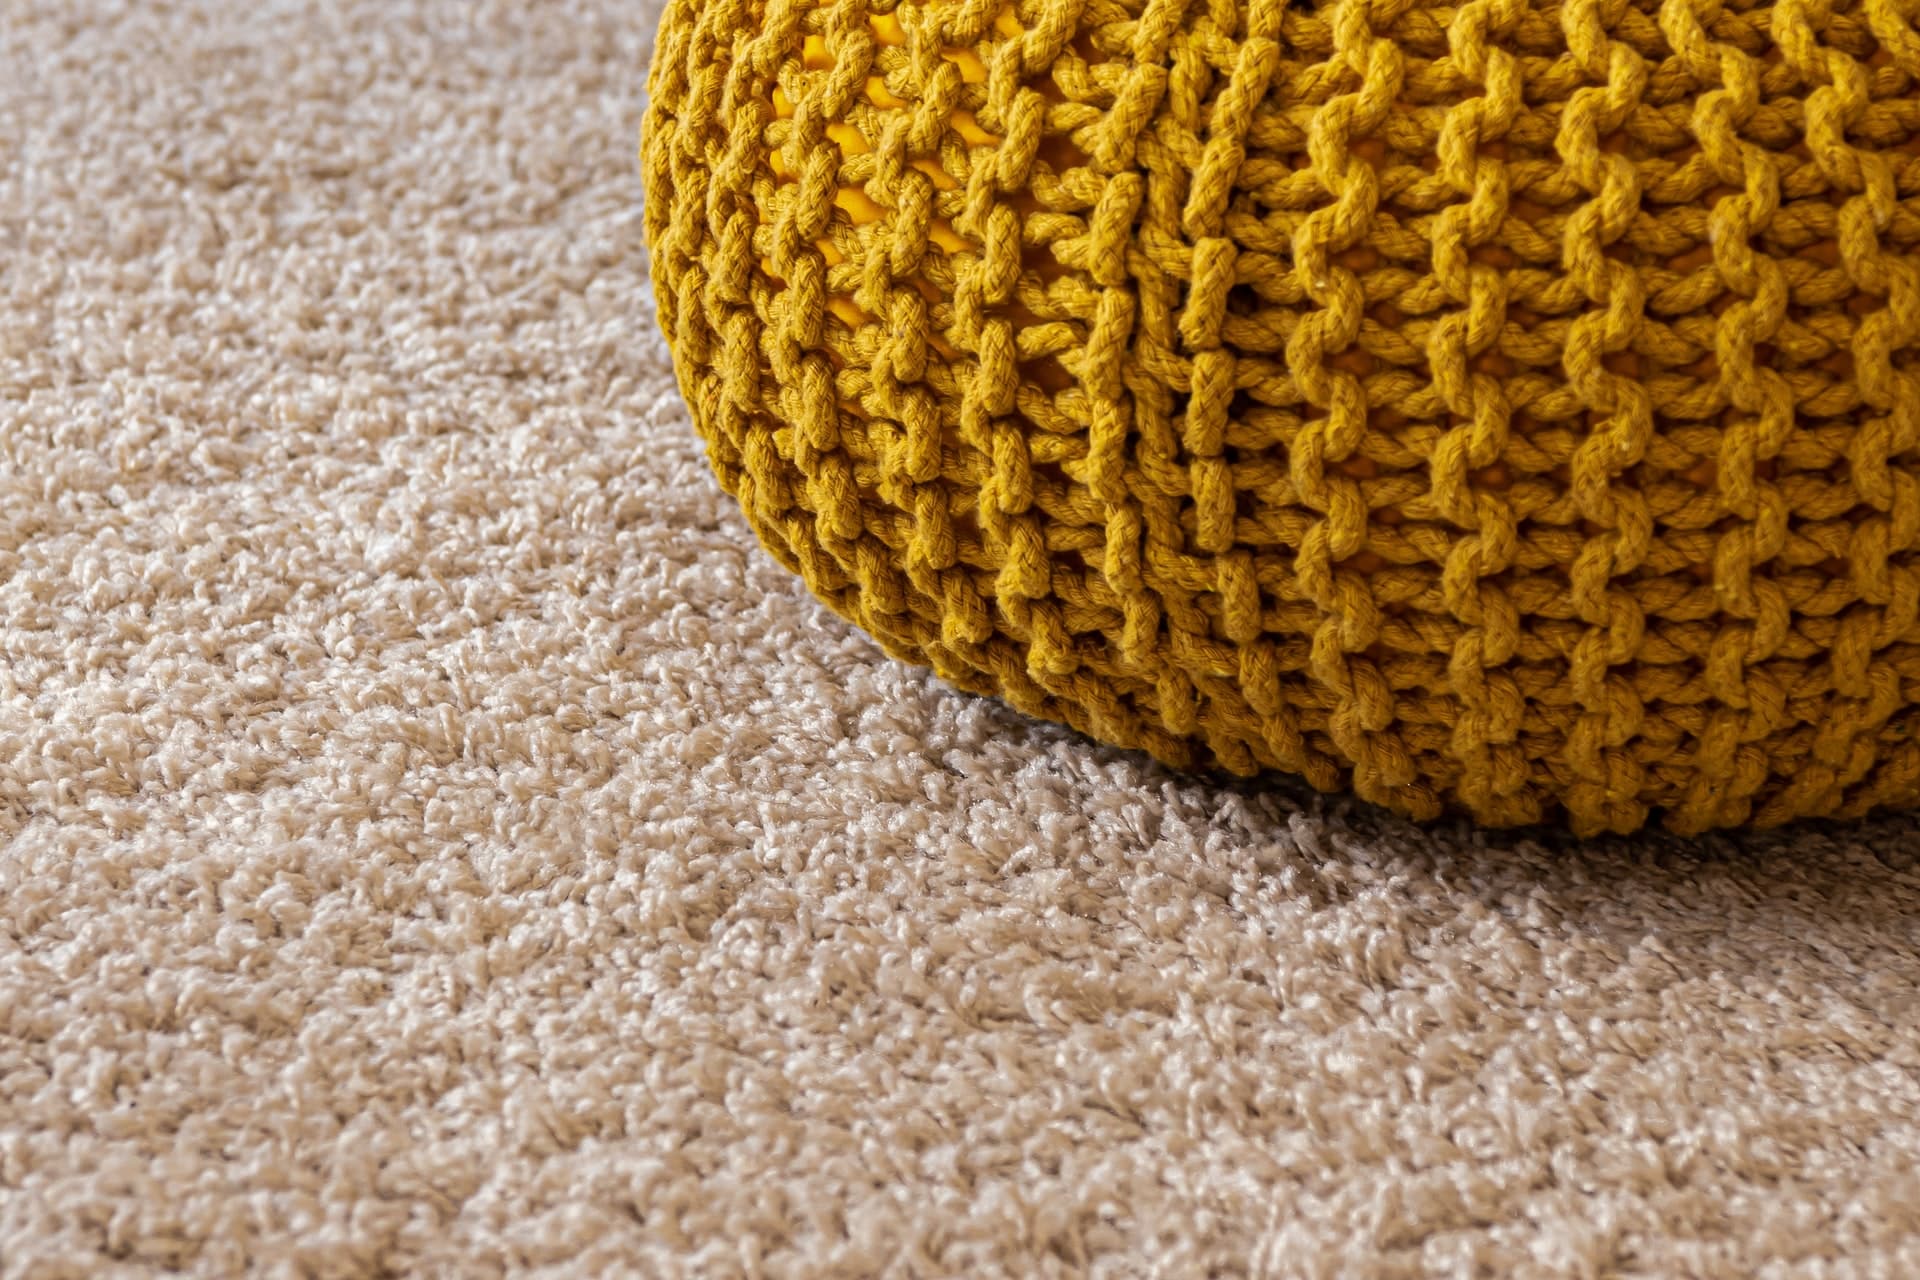 benefits of a professional carpet cleaner